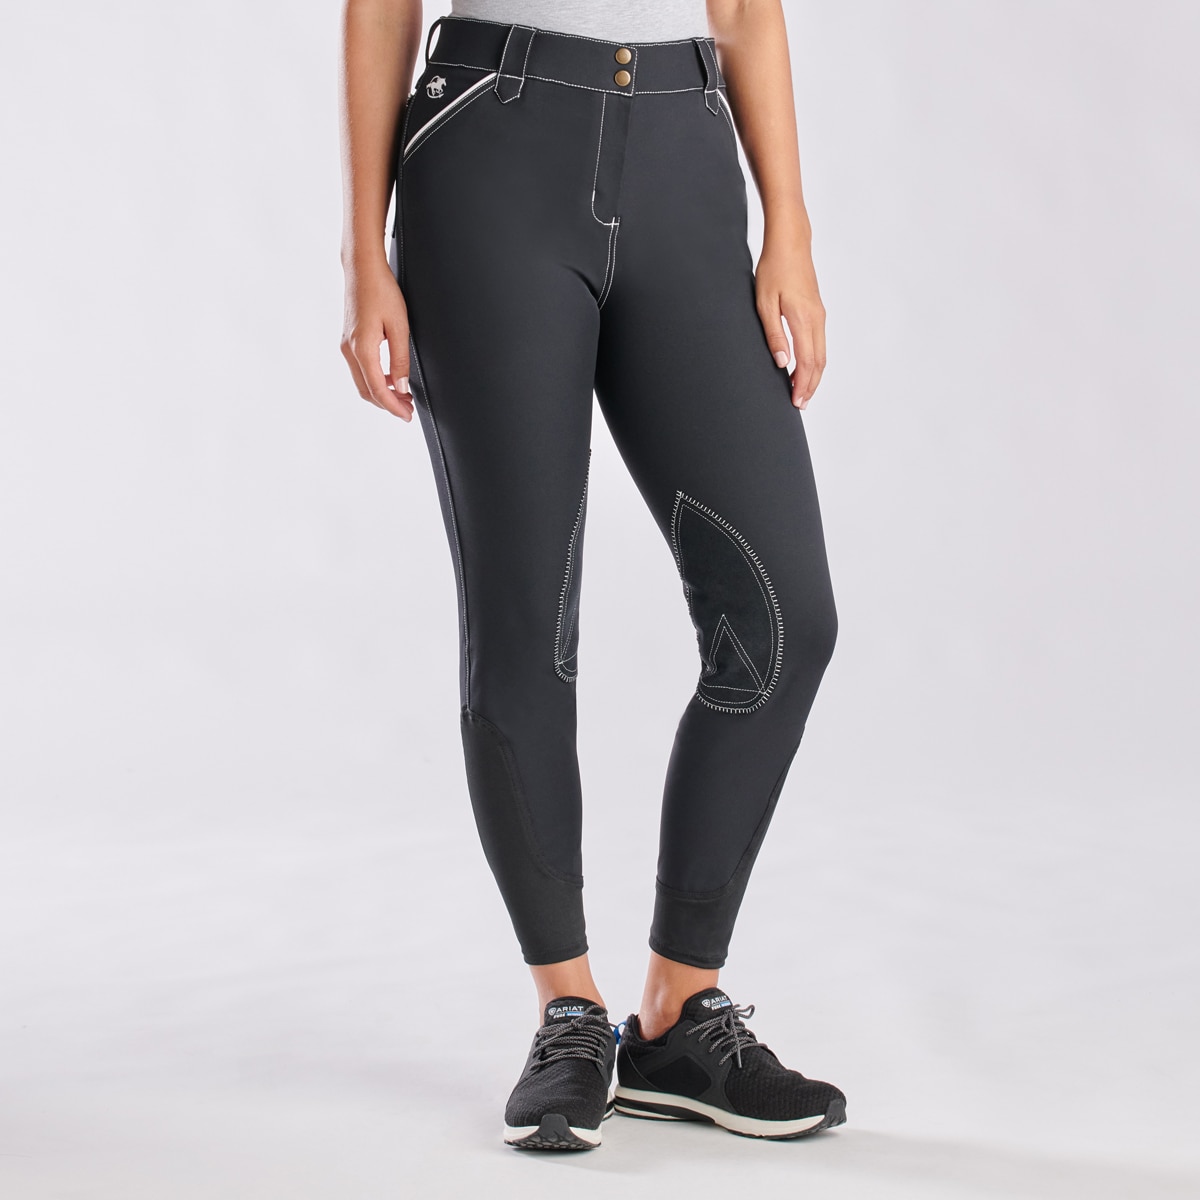 Shop for Riding Breeches & Tights – SmartPak Equine